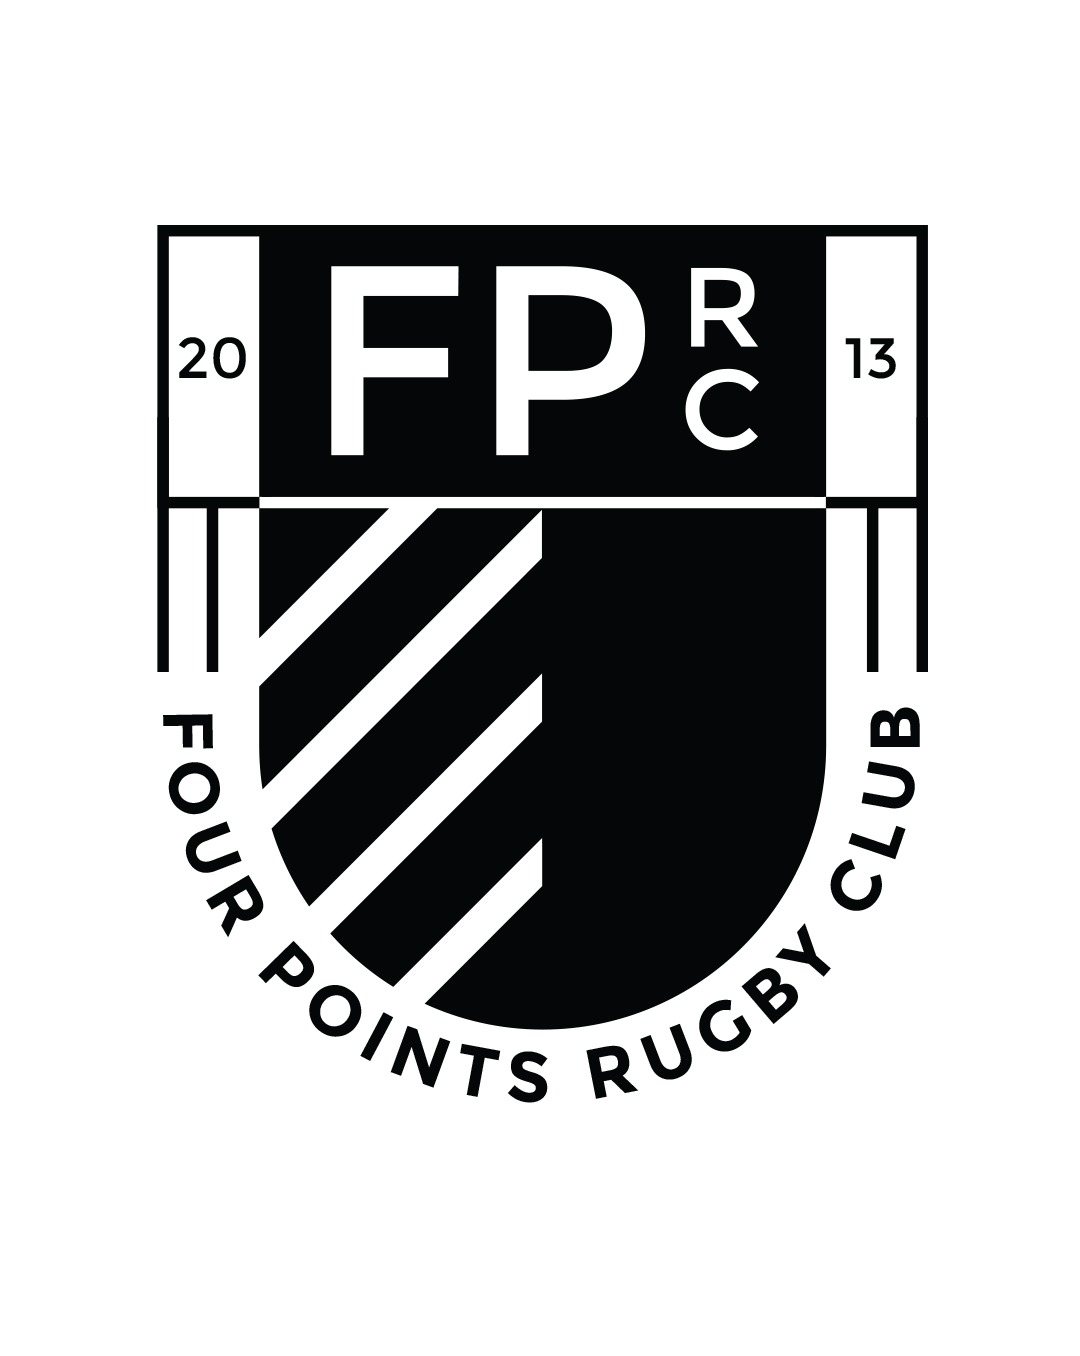 Logo design and Brand Development for Four Points Rugby - Mindset Creative Agency